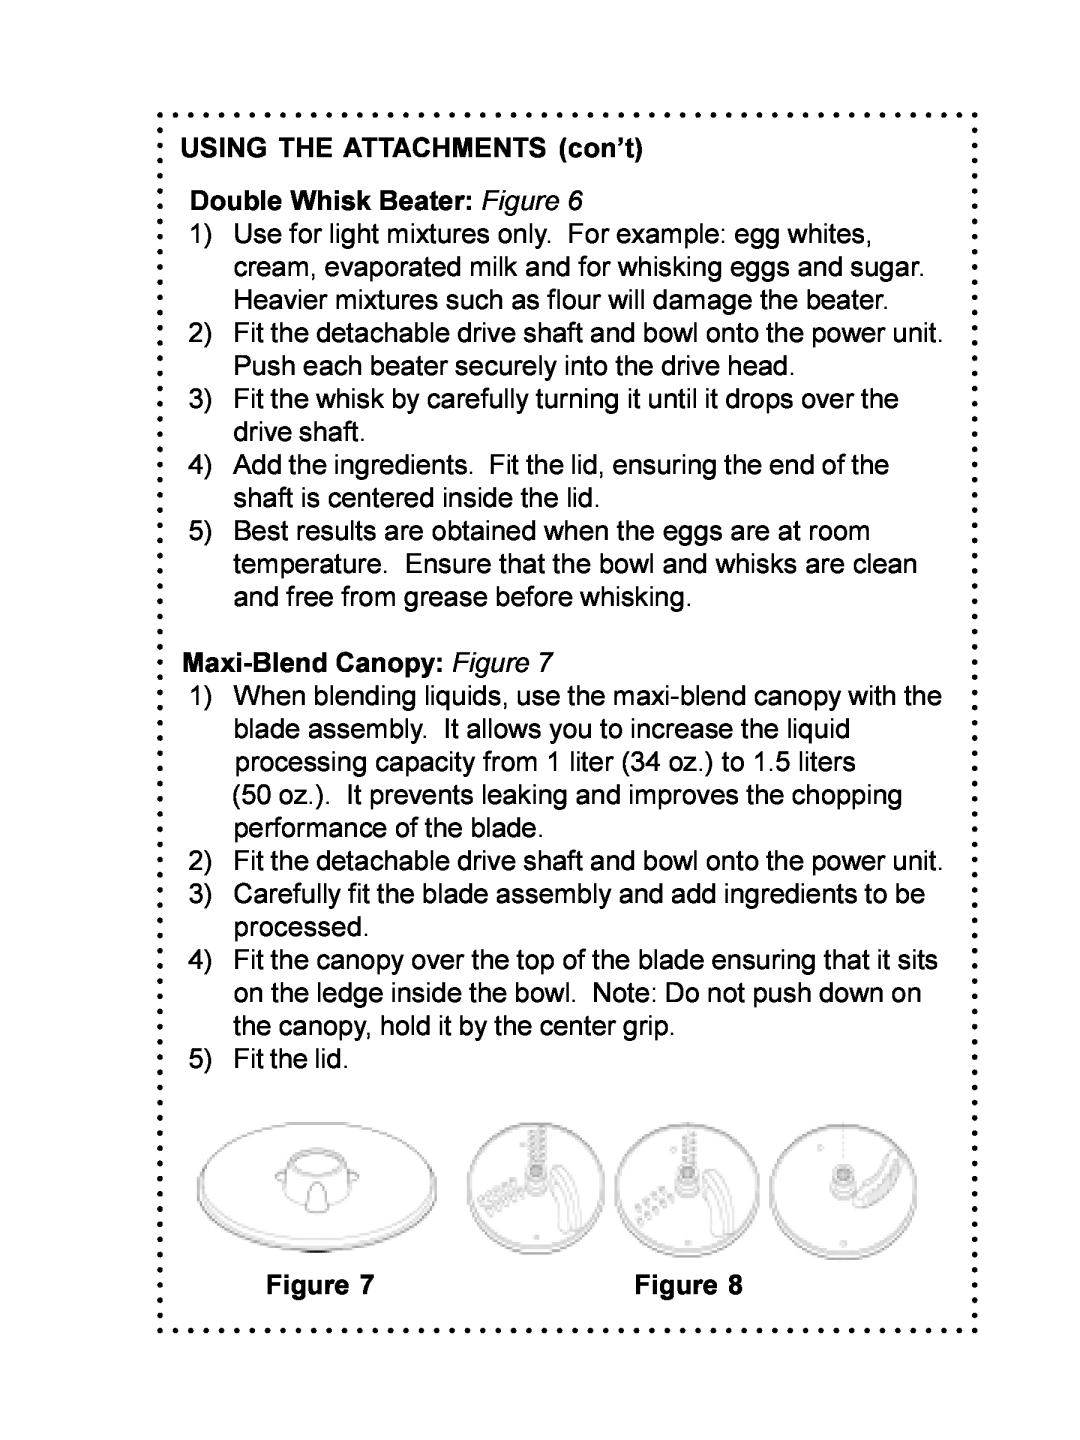 DeLonghi DFP690 Series instruction manual USING THE ATTACHMENTS con’t, Double Whisk Beater Figure, Maxi-BlendCanopy Figure 